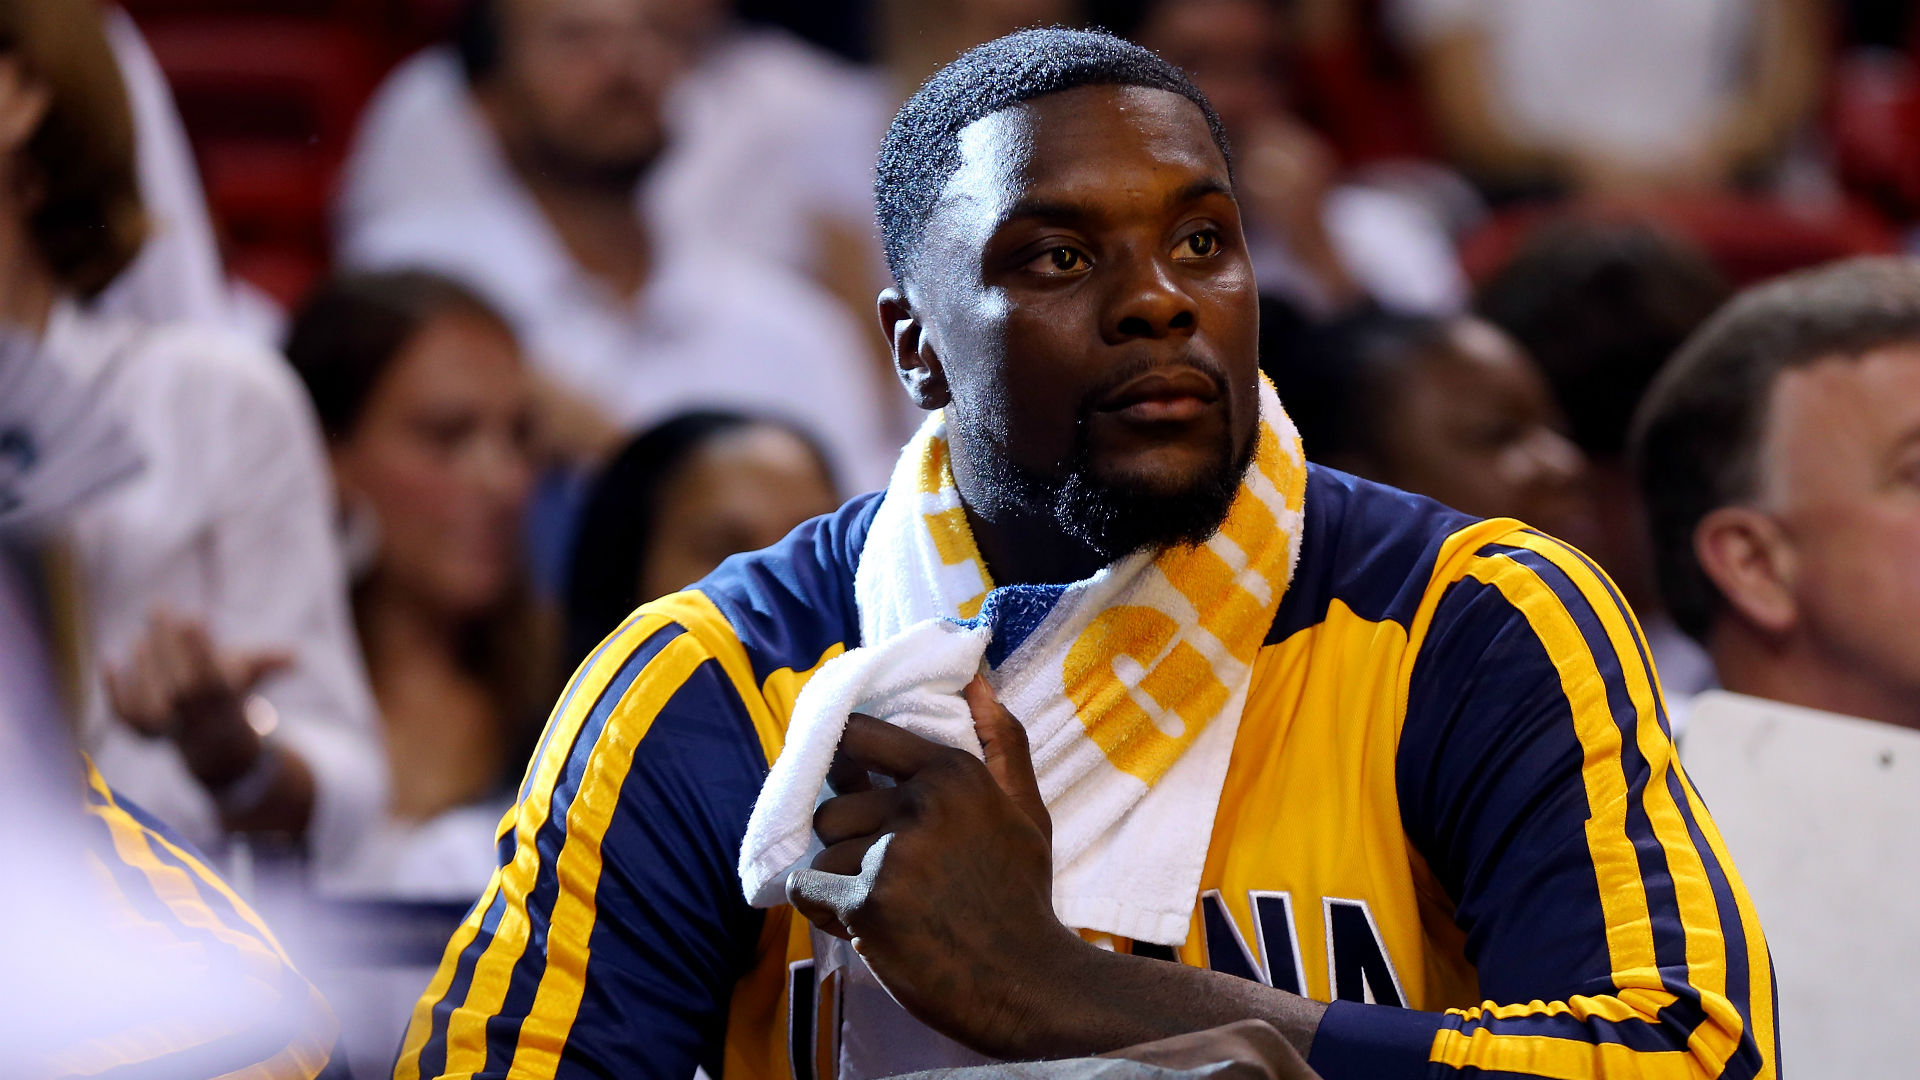 http://images.performgroup.com/di/library/sporting_news/69/50/lance-stephenson-093014-ftr-gettyjpg_rii8vo1kfrwe1owy648h2wnf3.jpg?t=-809424056